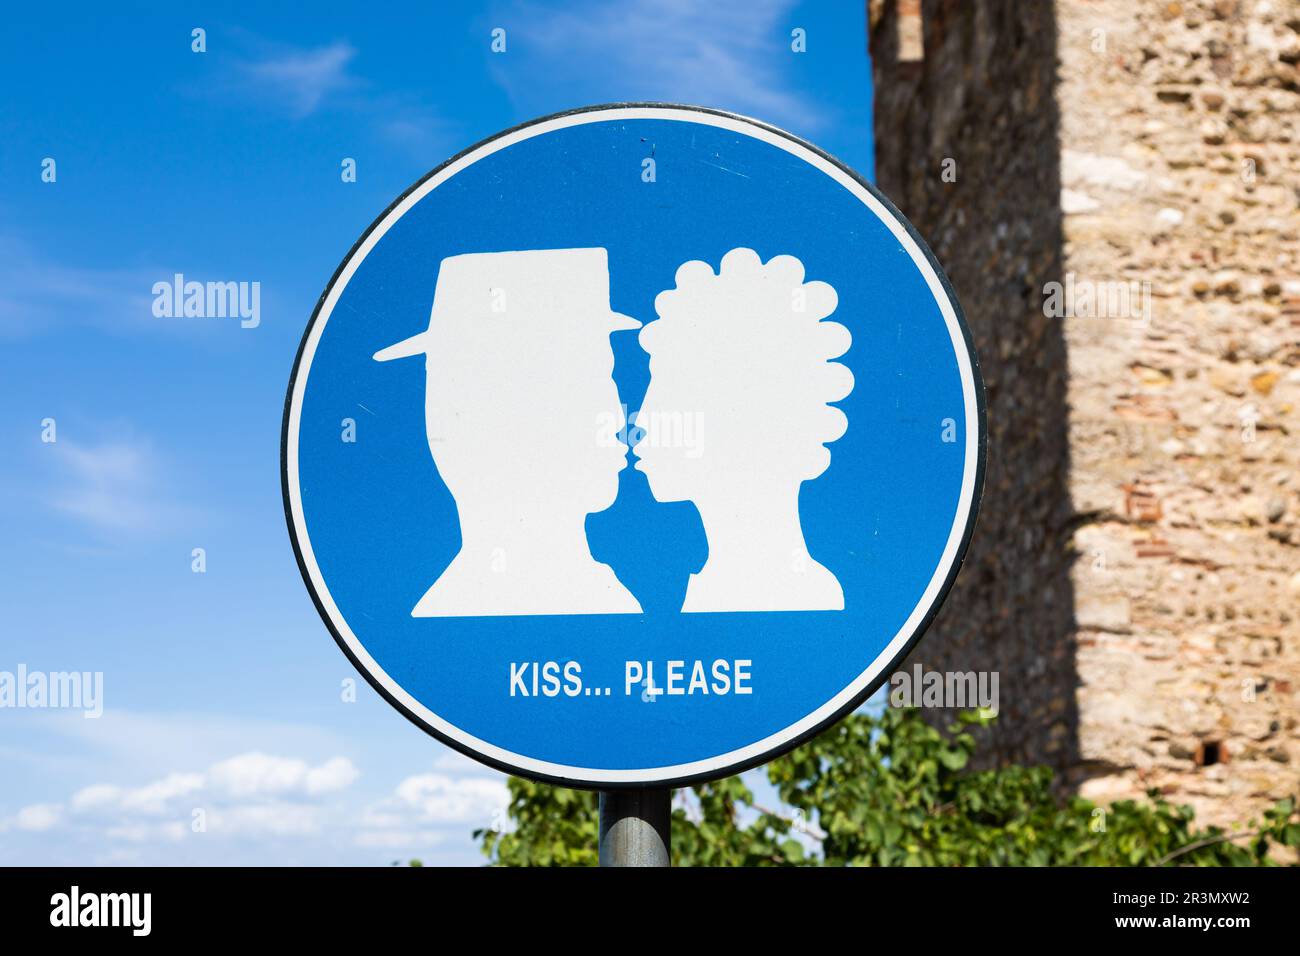 Kiss street sign located in public area in front of Sirmione castle, Italy. Concept of love, couple, romantic. Stock Photo